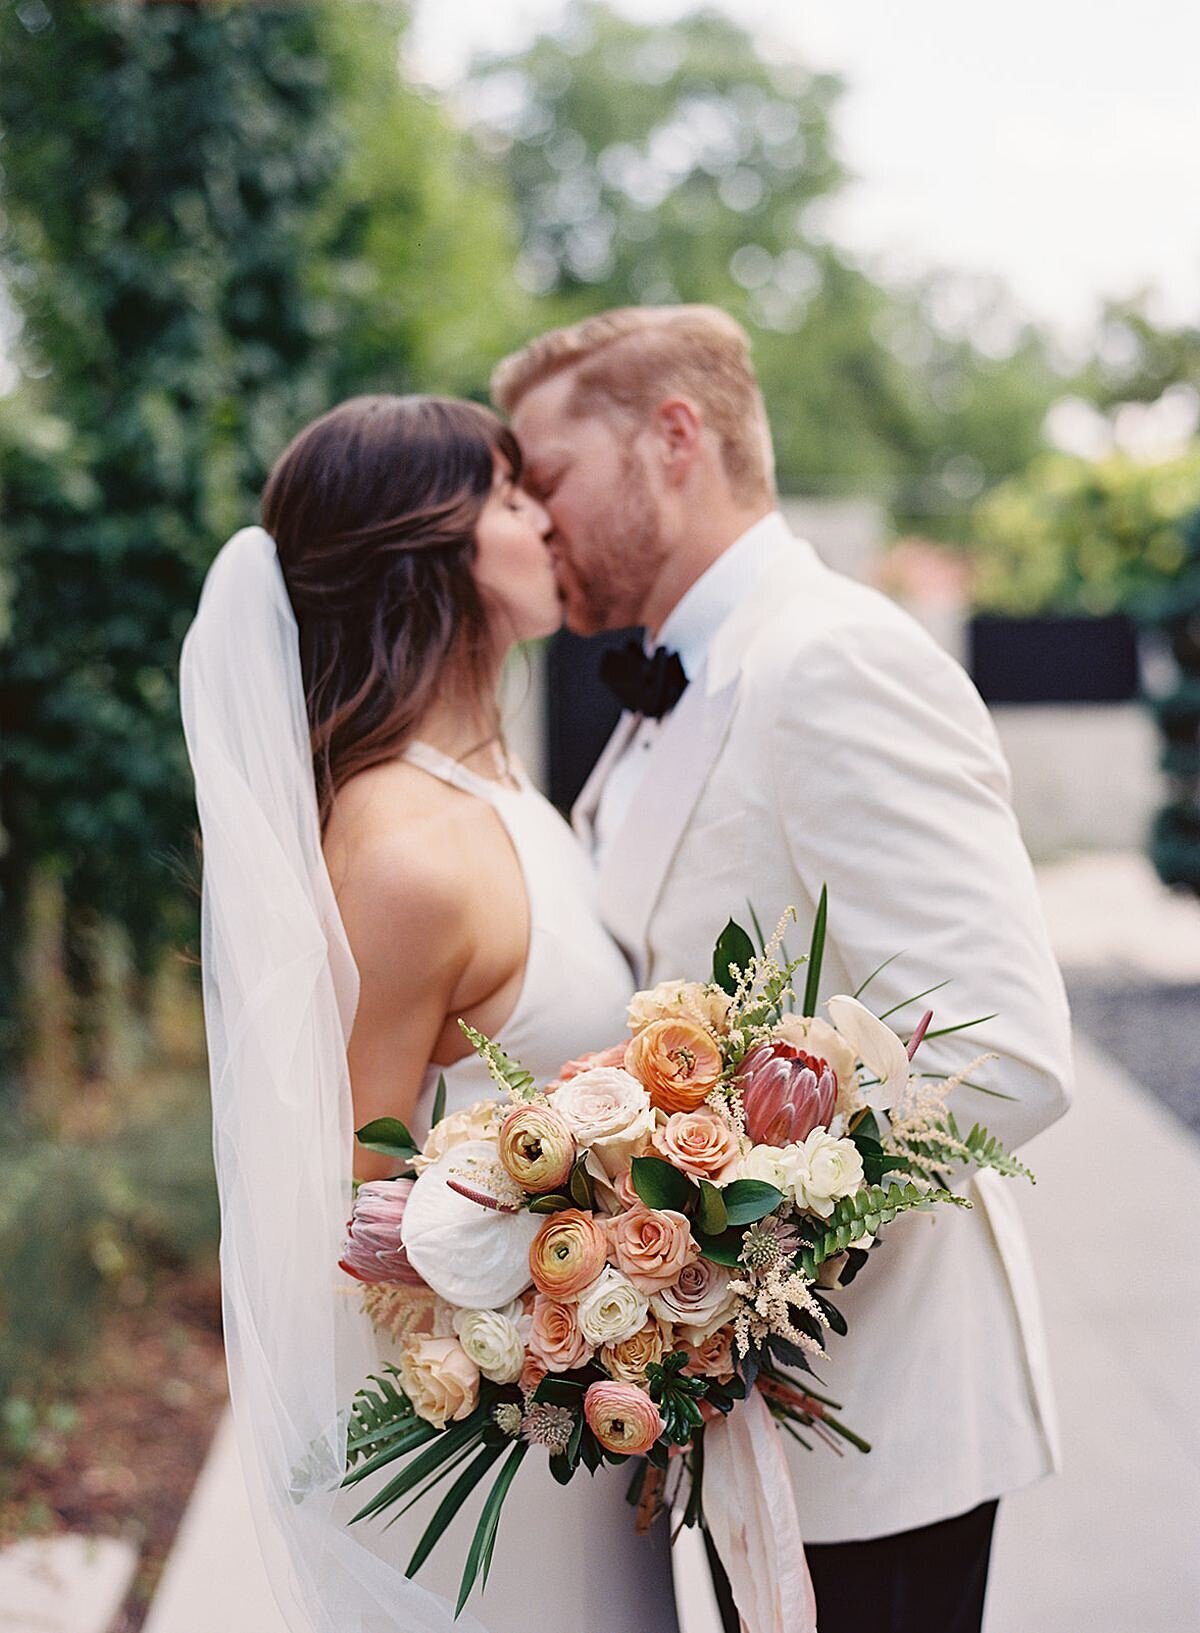 The bride, wearing a white silk halter top wedding dress and long veil kisses the groom wearing a tuxedo with a white jacket while holding her horizontal cascade bouquet of palm fronds and peach, blush, white and ivory tropical flowers.